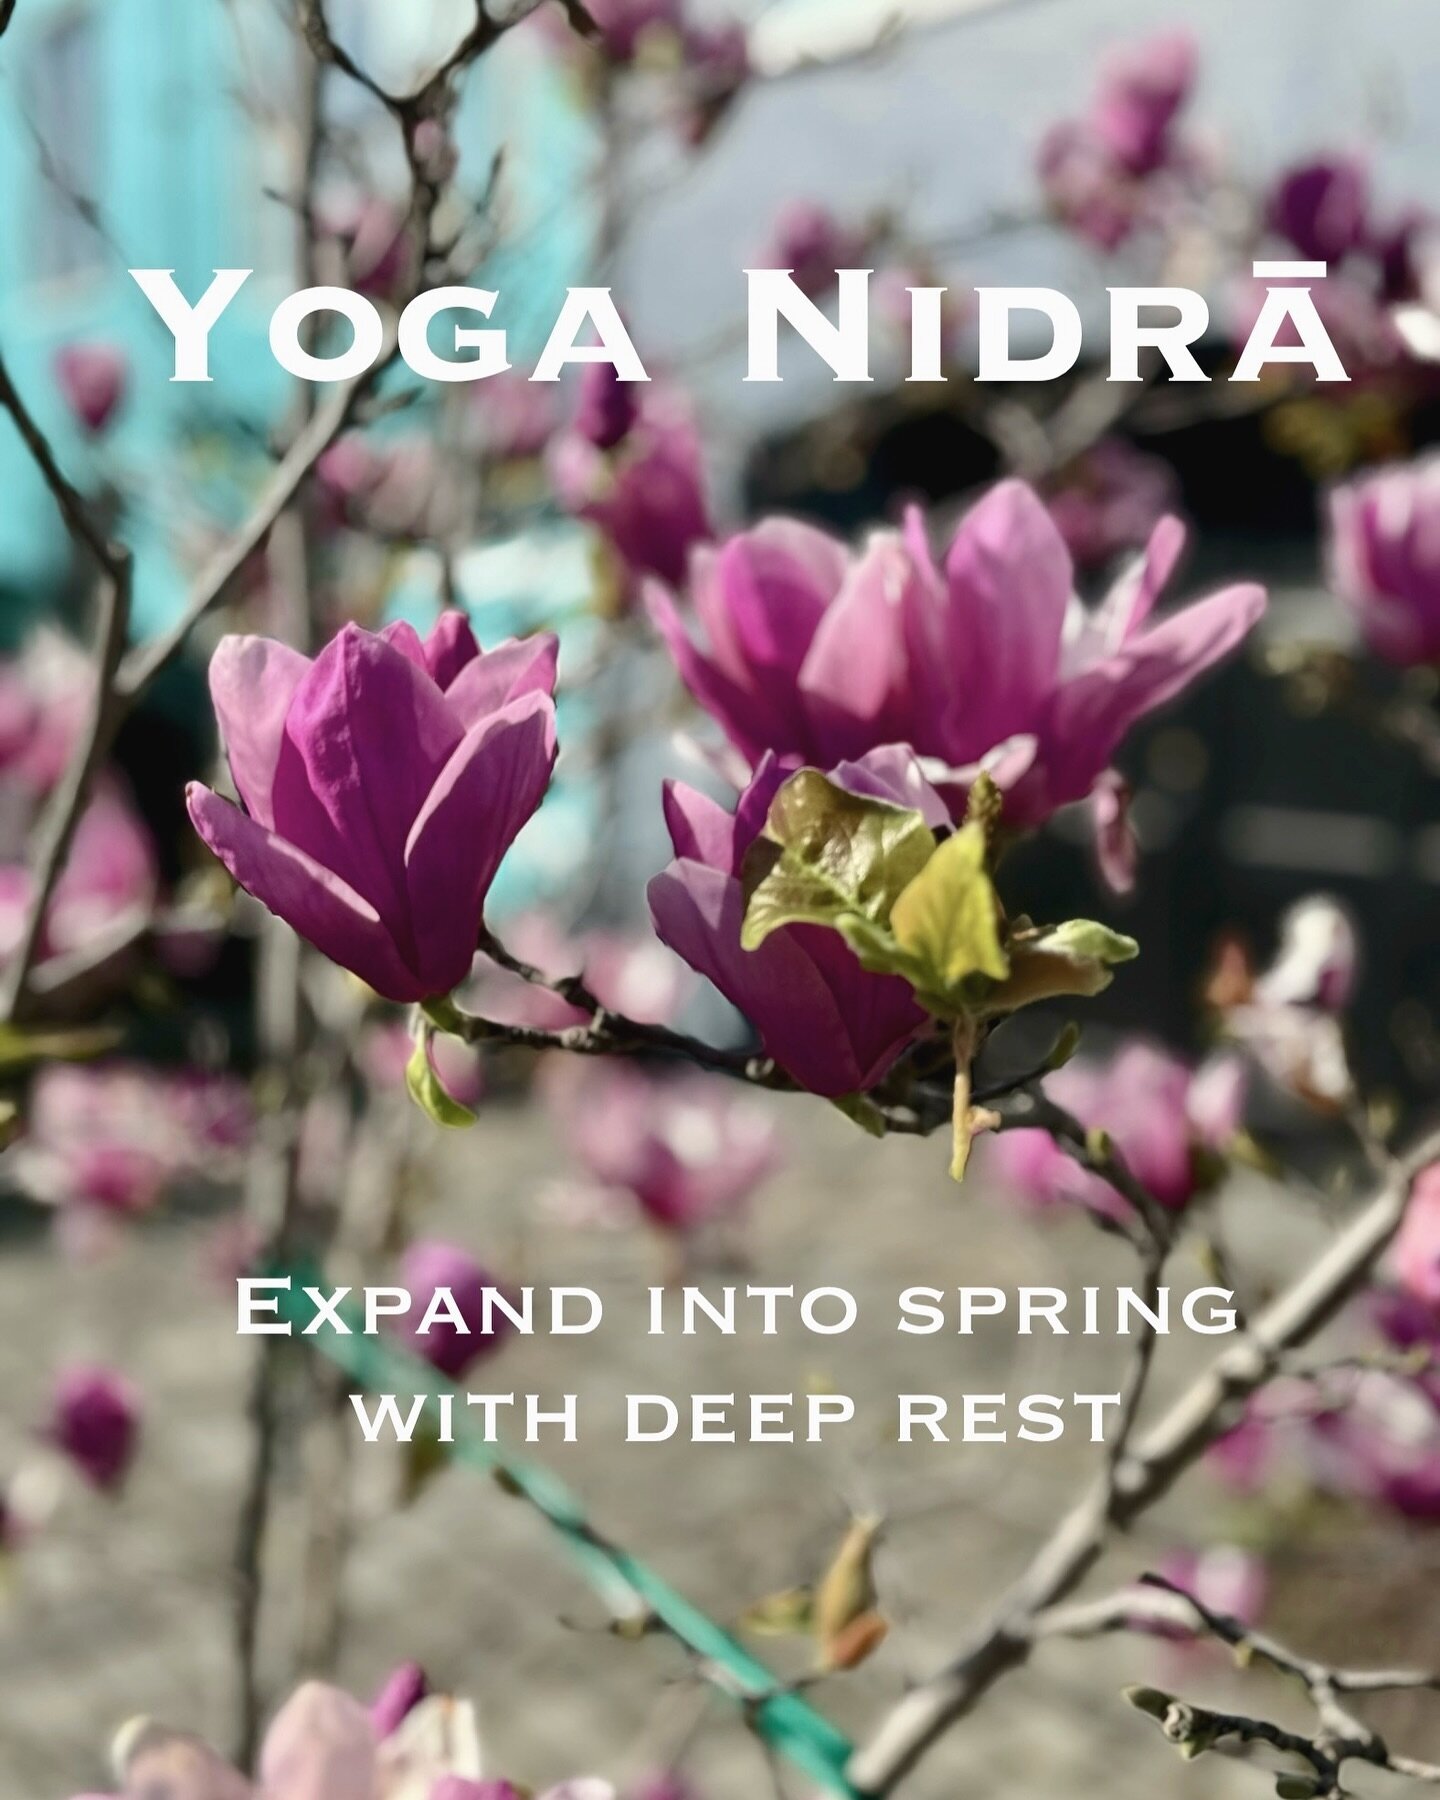 Did you know every Thursday at 10am you can drop in to an in-person Supreme Release Yoga (SRY) class at the studio with me?

Each month we have a theme and for March we are exploring the elements through Yoga Nidrā 

What is Yoga Nidrā? Yoga Nidrā is